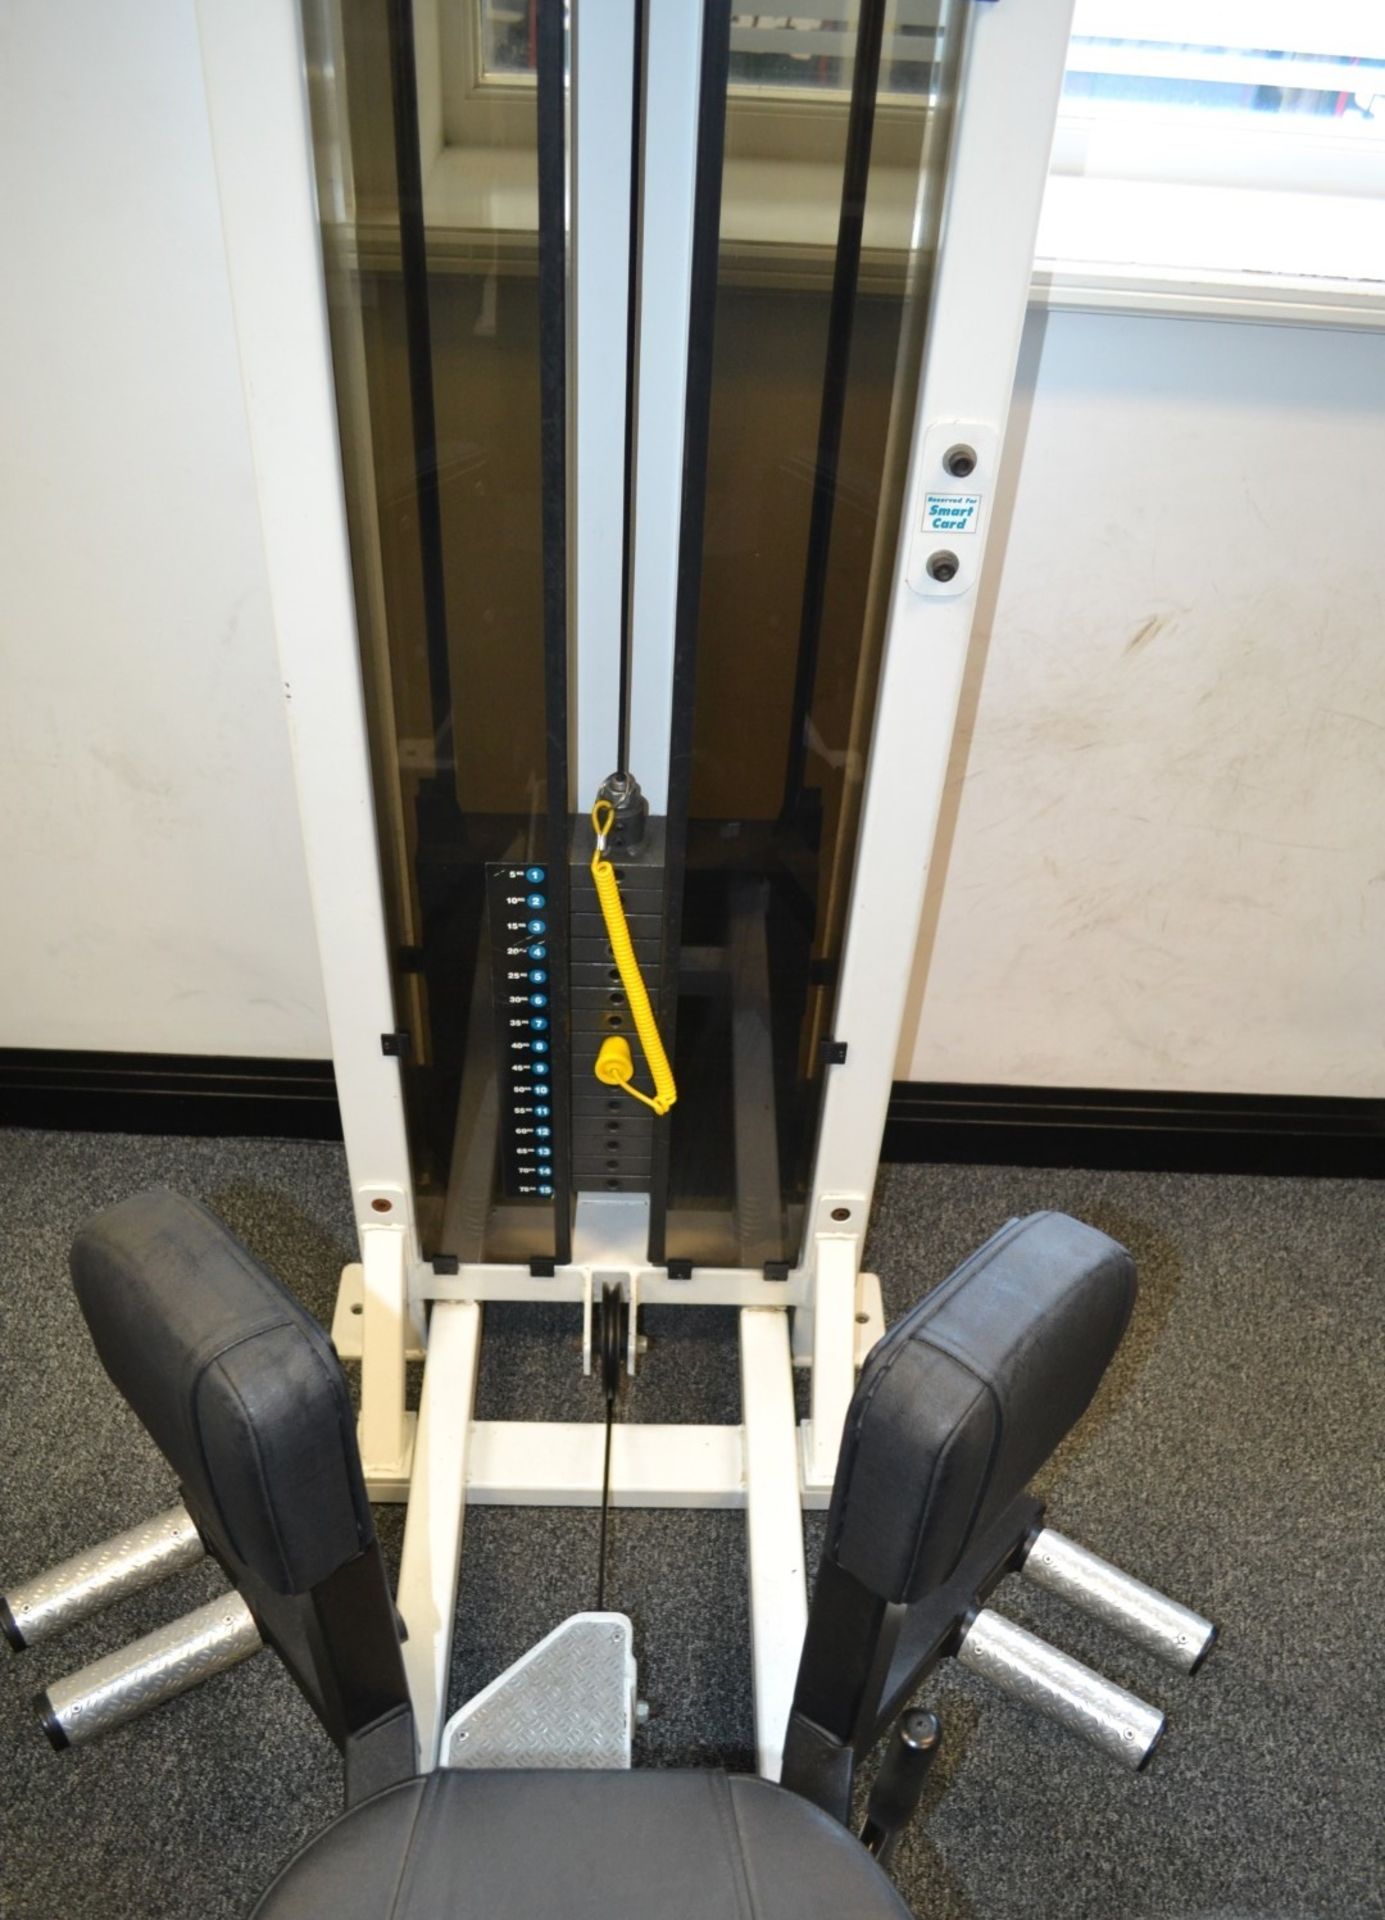 1 x Force Inner Thigh Abductor Pin Loaded Gym Machine With 75kg Weights - Image 4 of 4